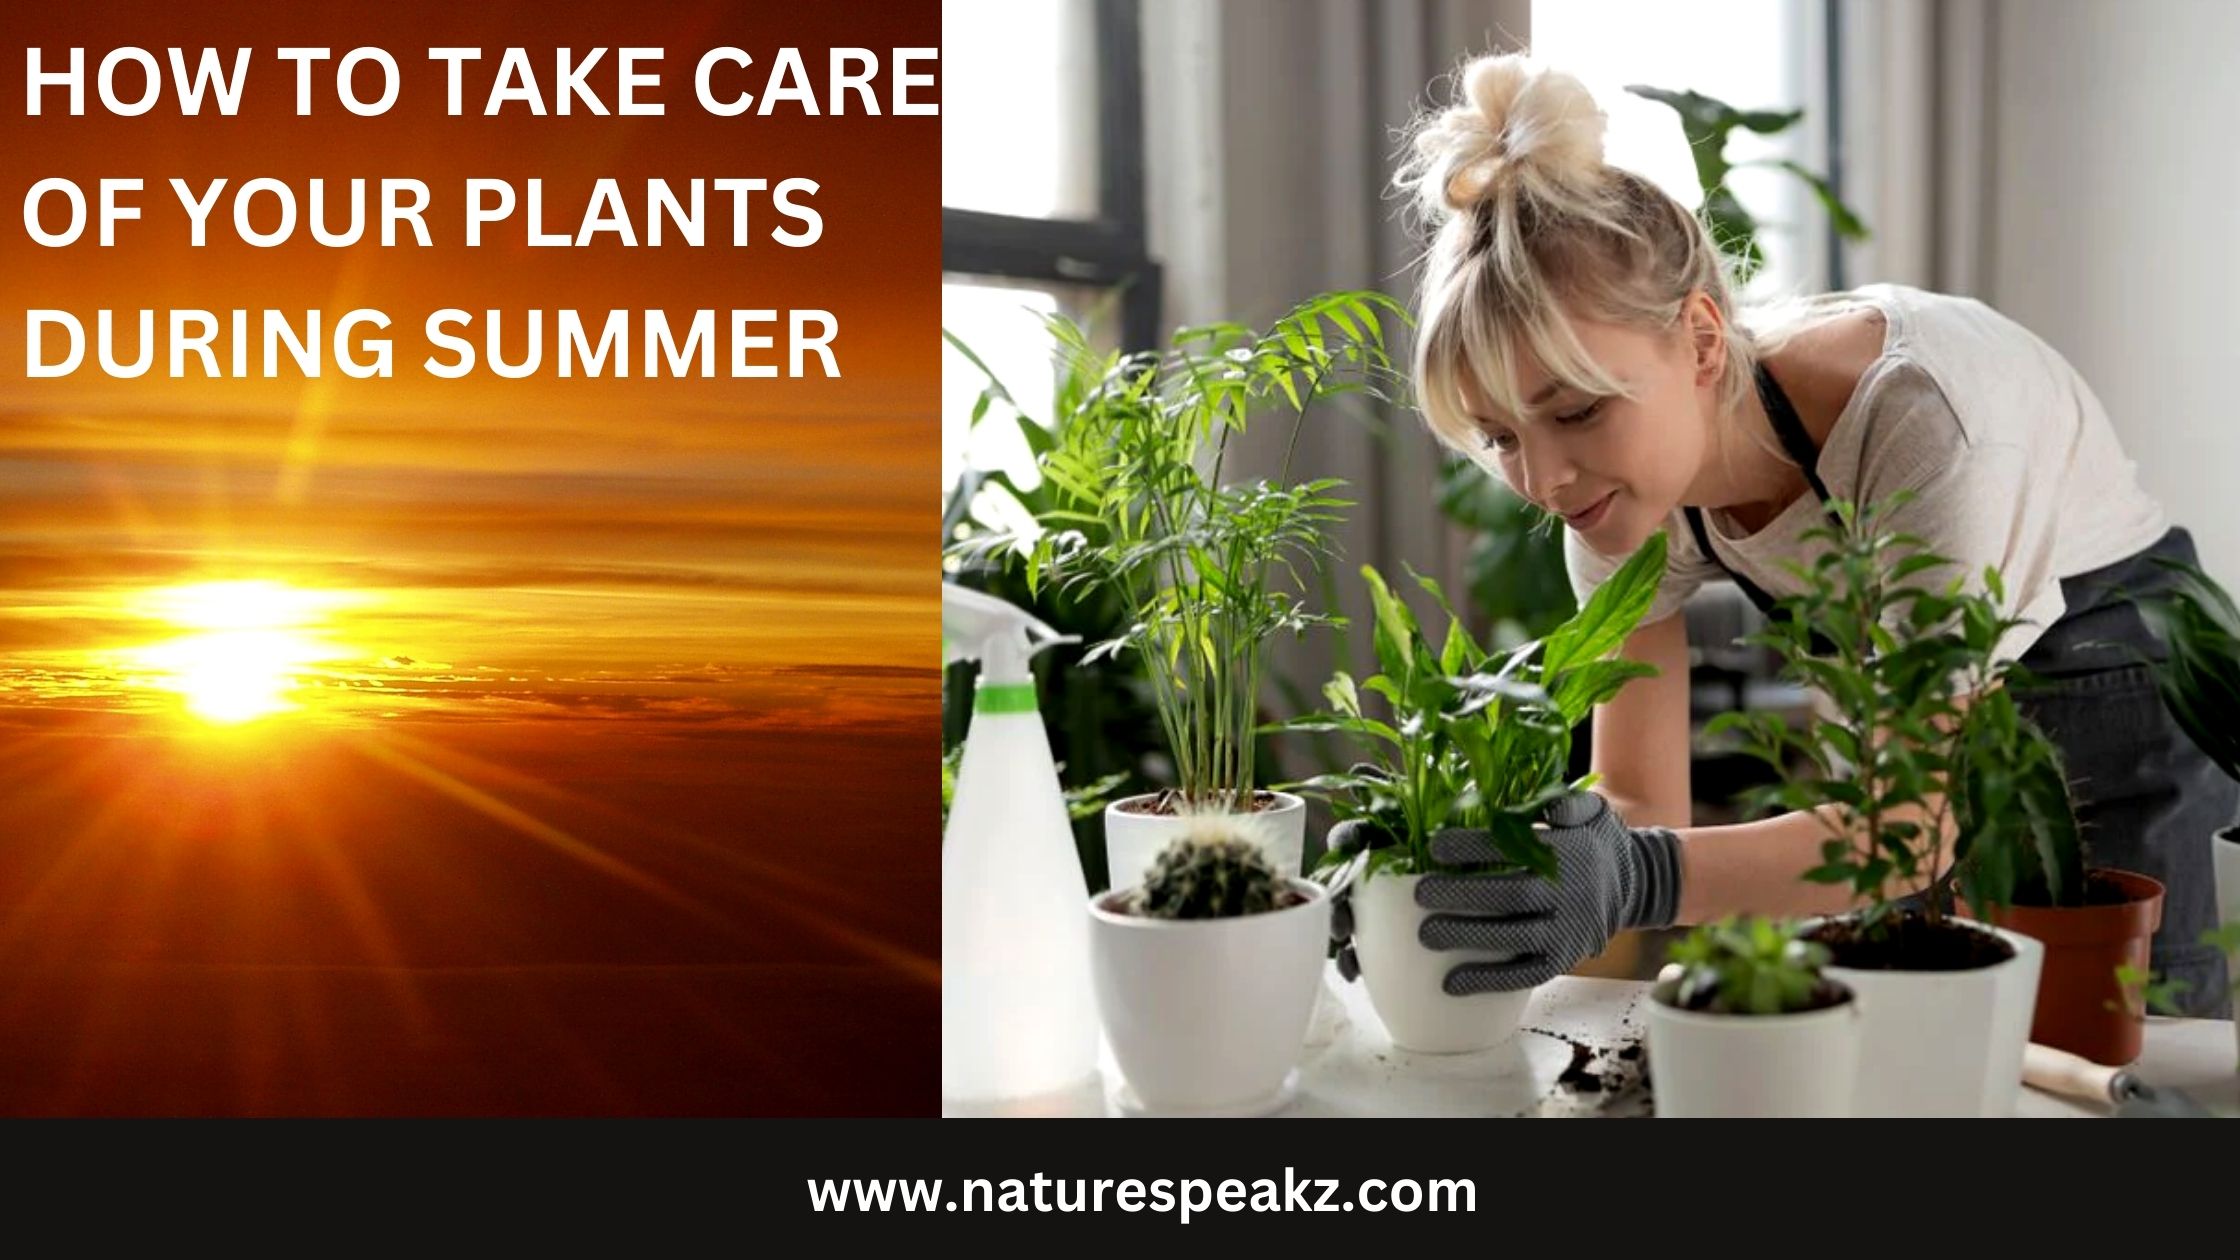 How to Take Care of Your Plants during Summer